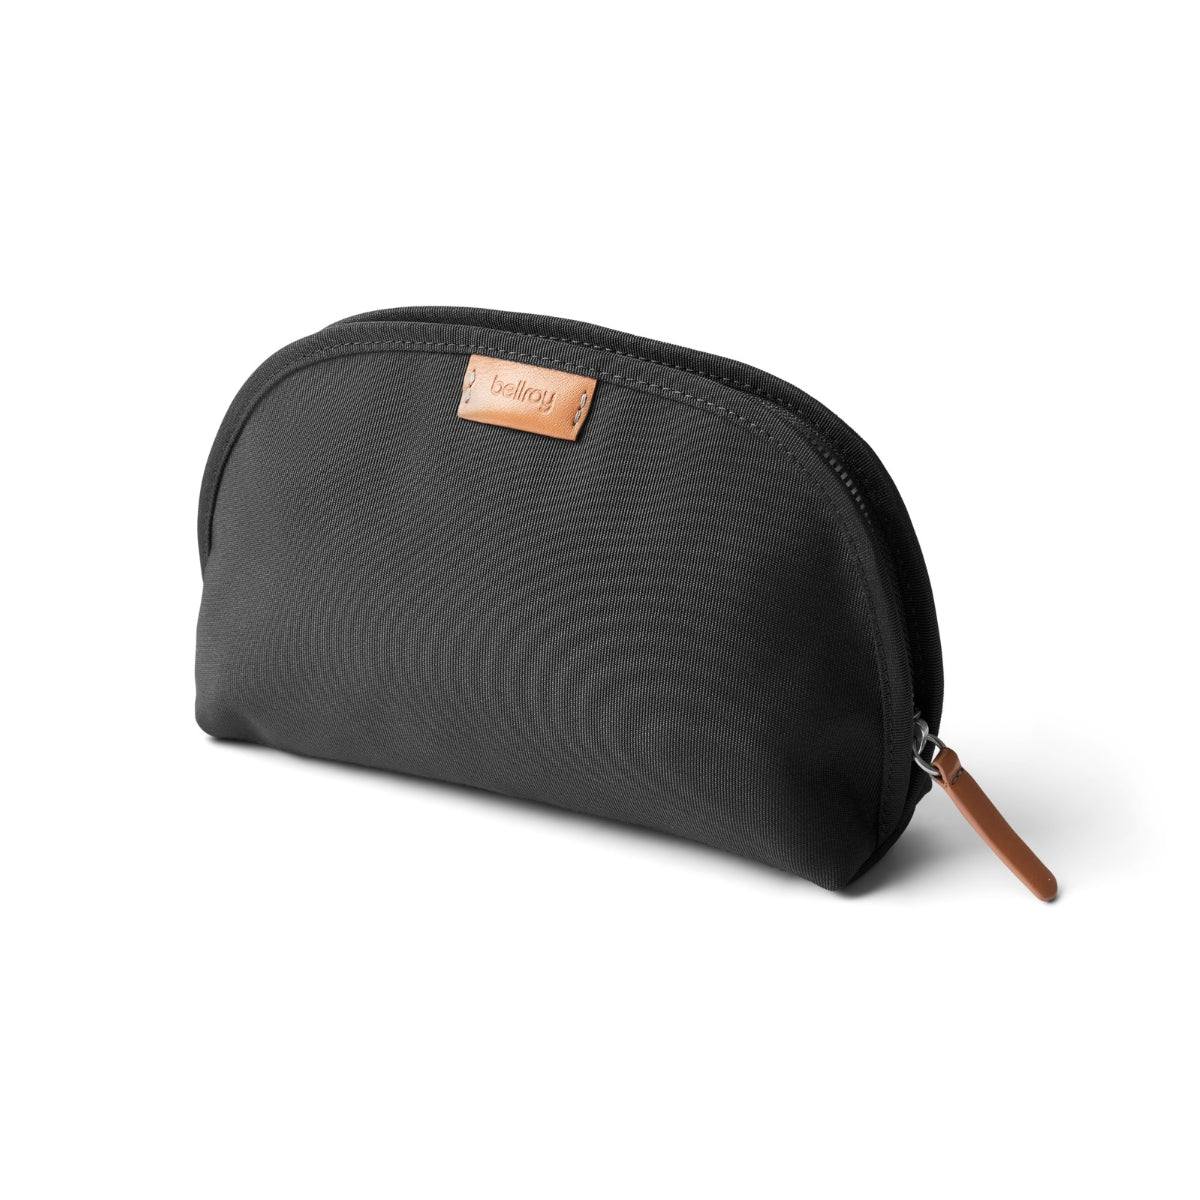 Bellroy Classic Pouch in Slate